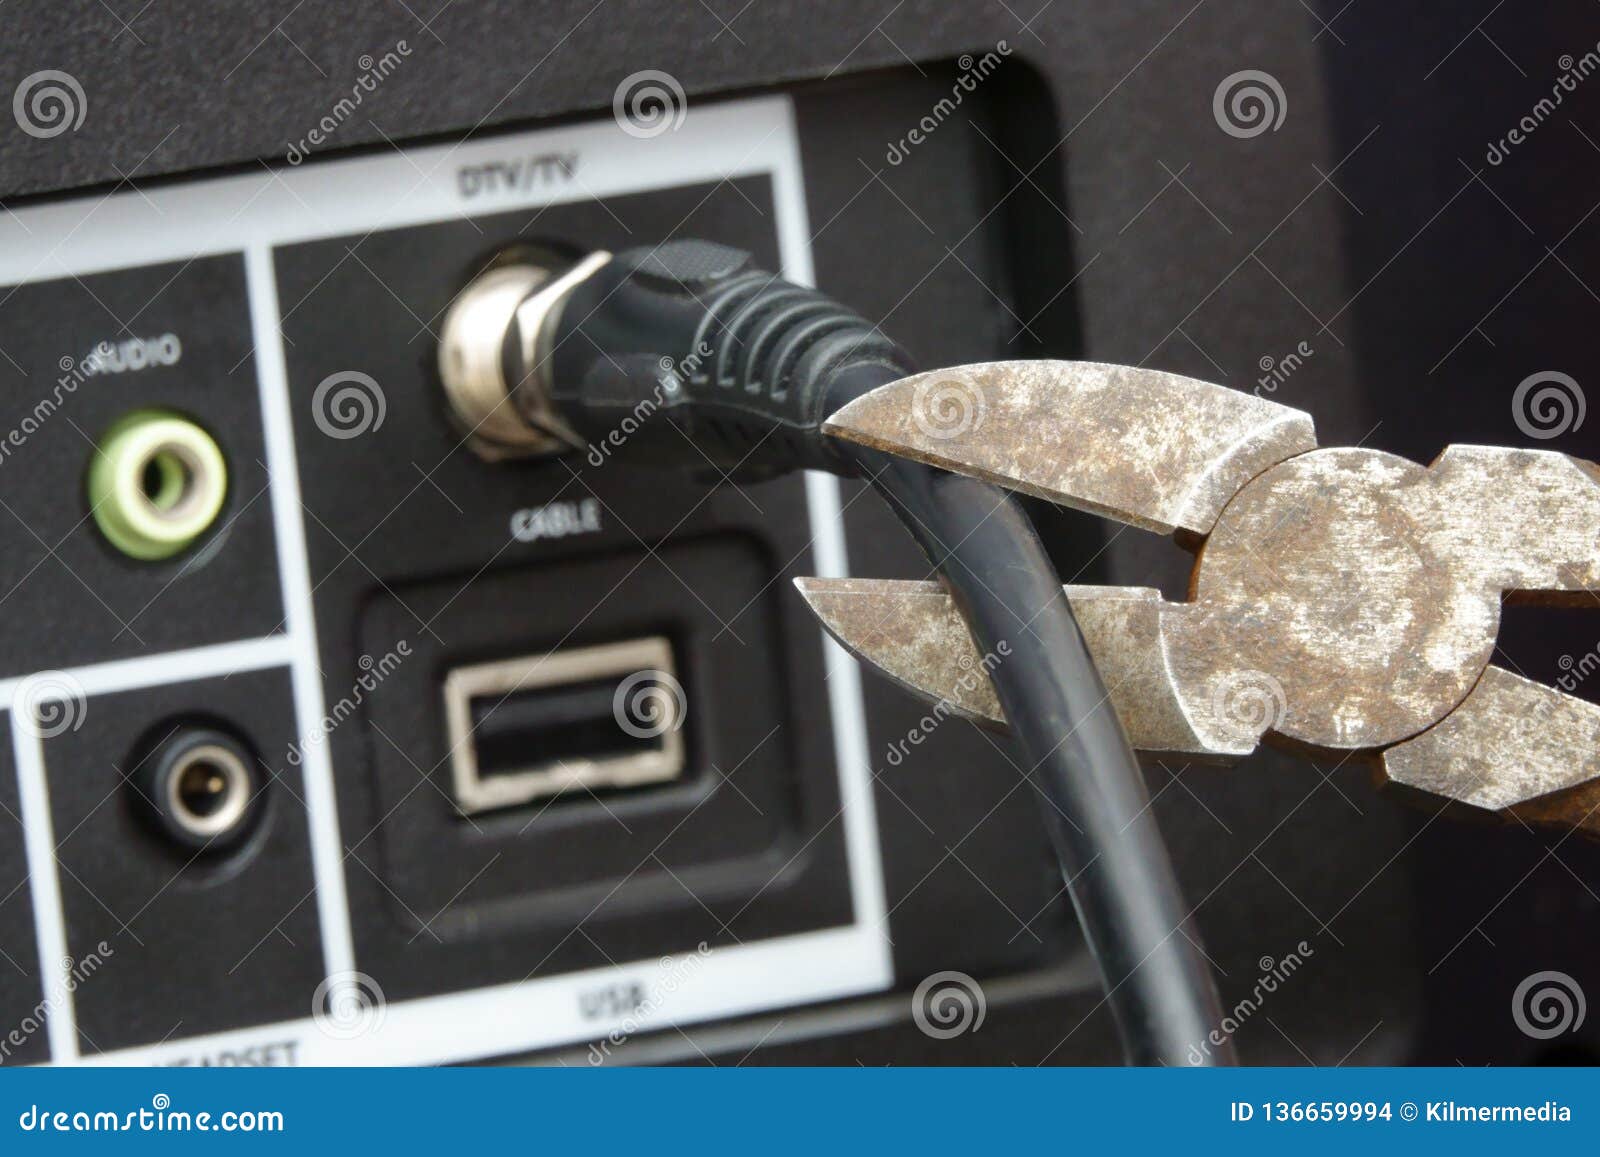 cutting the cable tv cord with a wire cutter tool